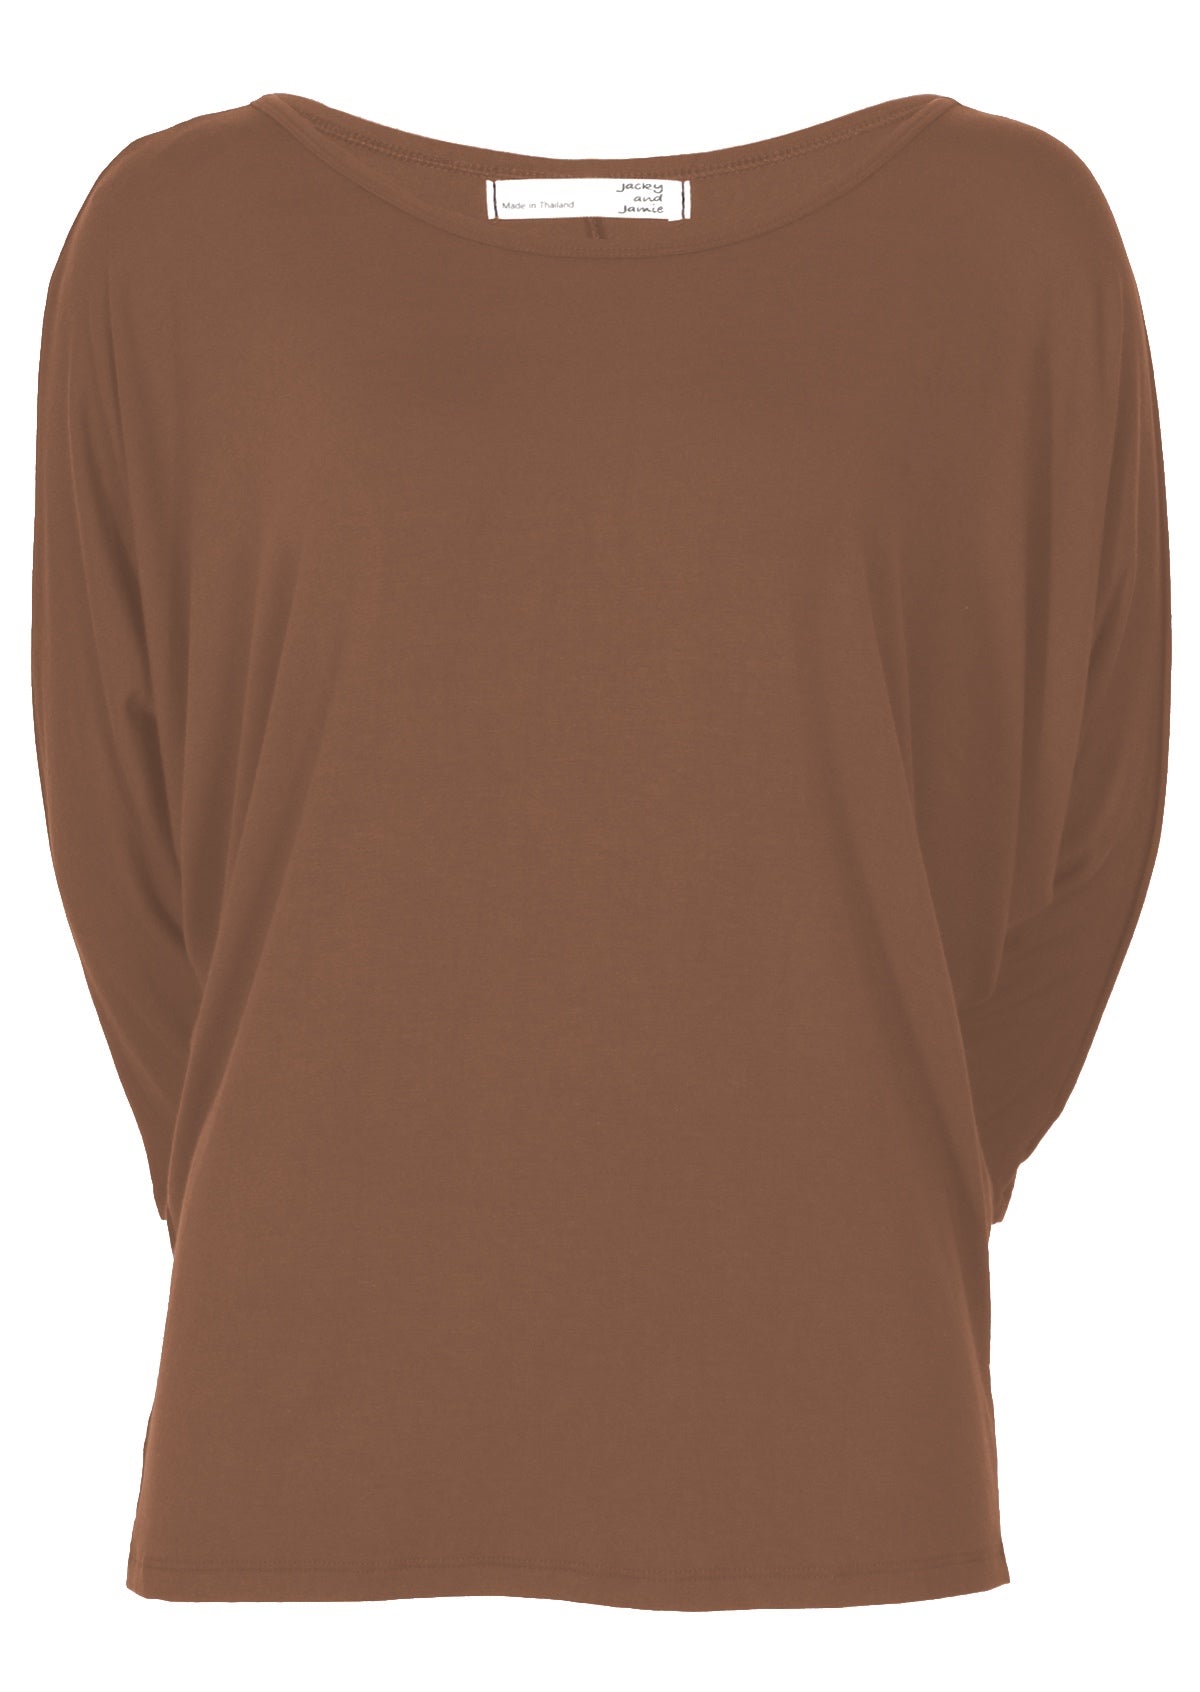 Front view of women's 3/4 sleeve rayon batwing round neckline brown top.